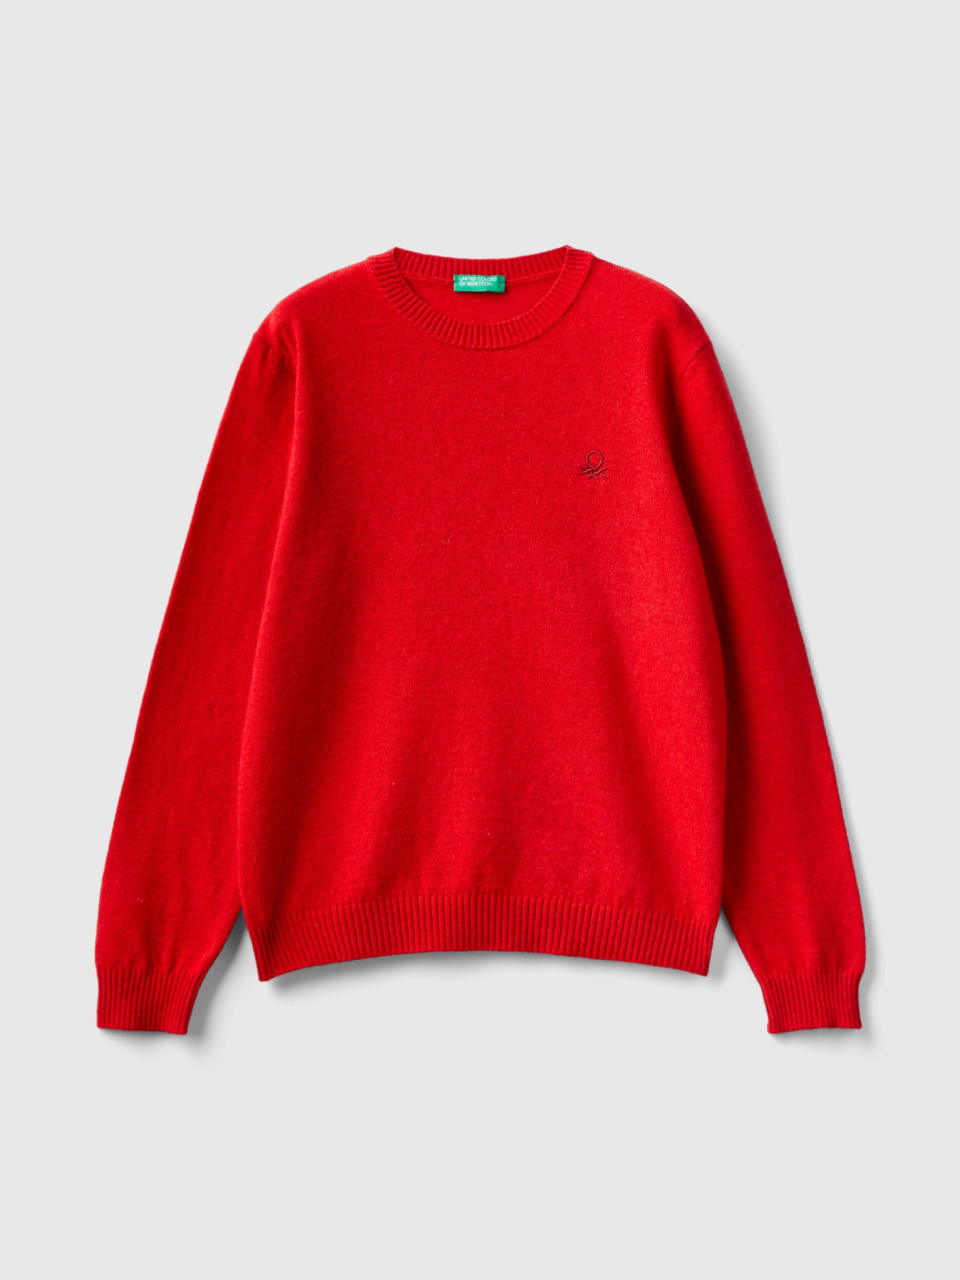 Benetton, Sweater In Cashmere And Wool Blend, Red, Kids